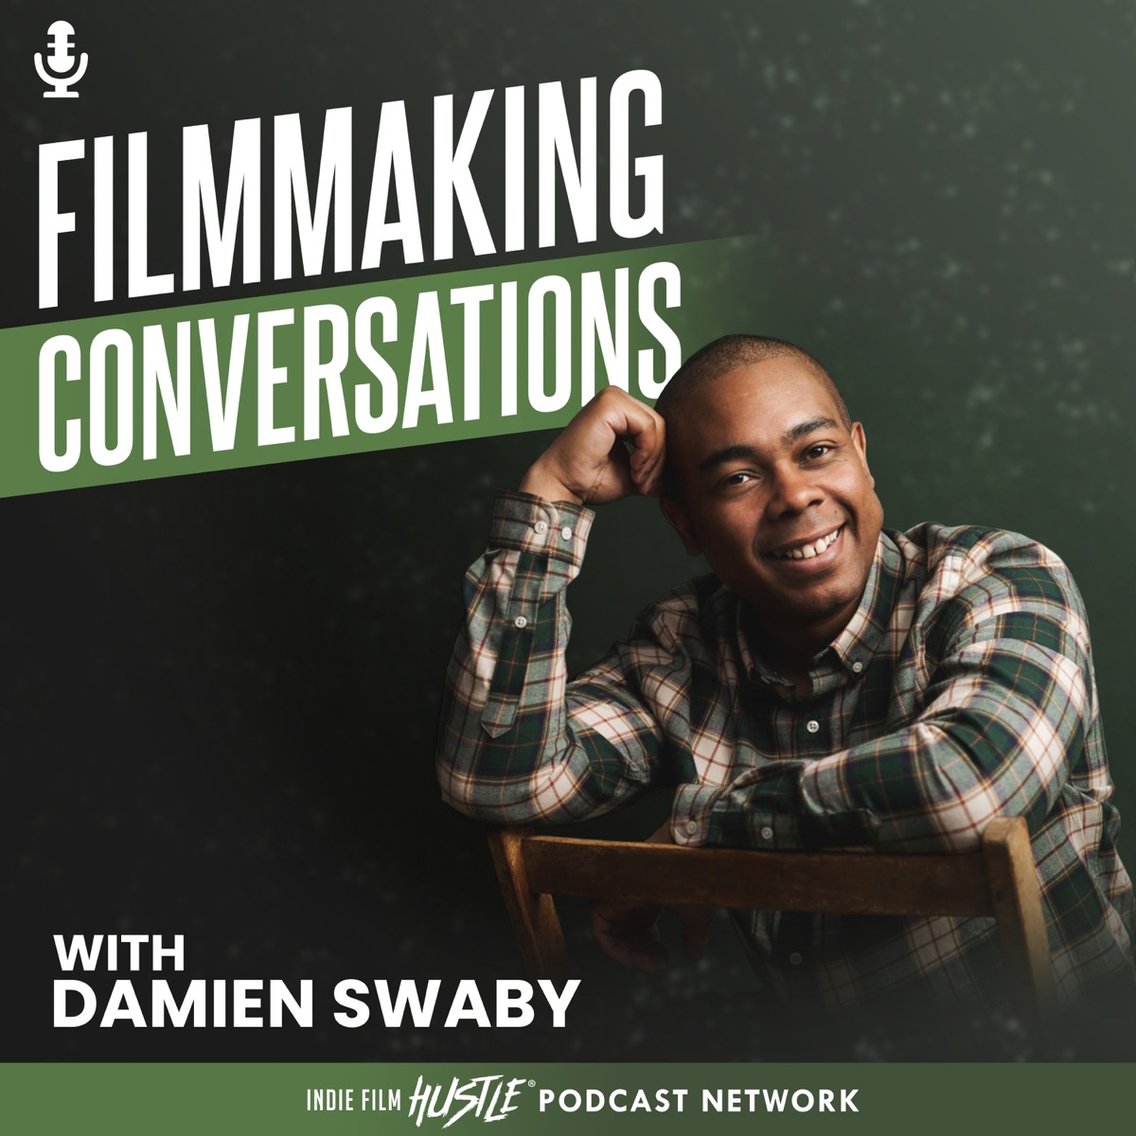 Filmmaking Conversations Podcast with Damien Swaby - Cover Image